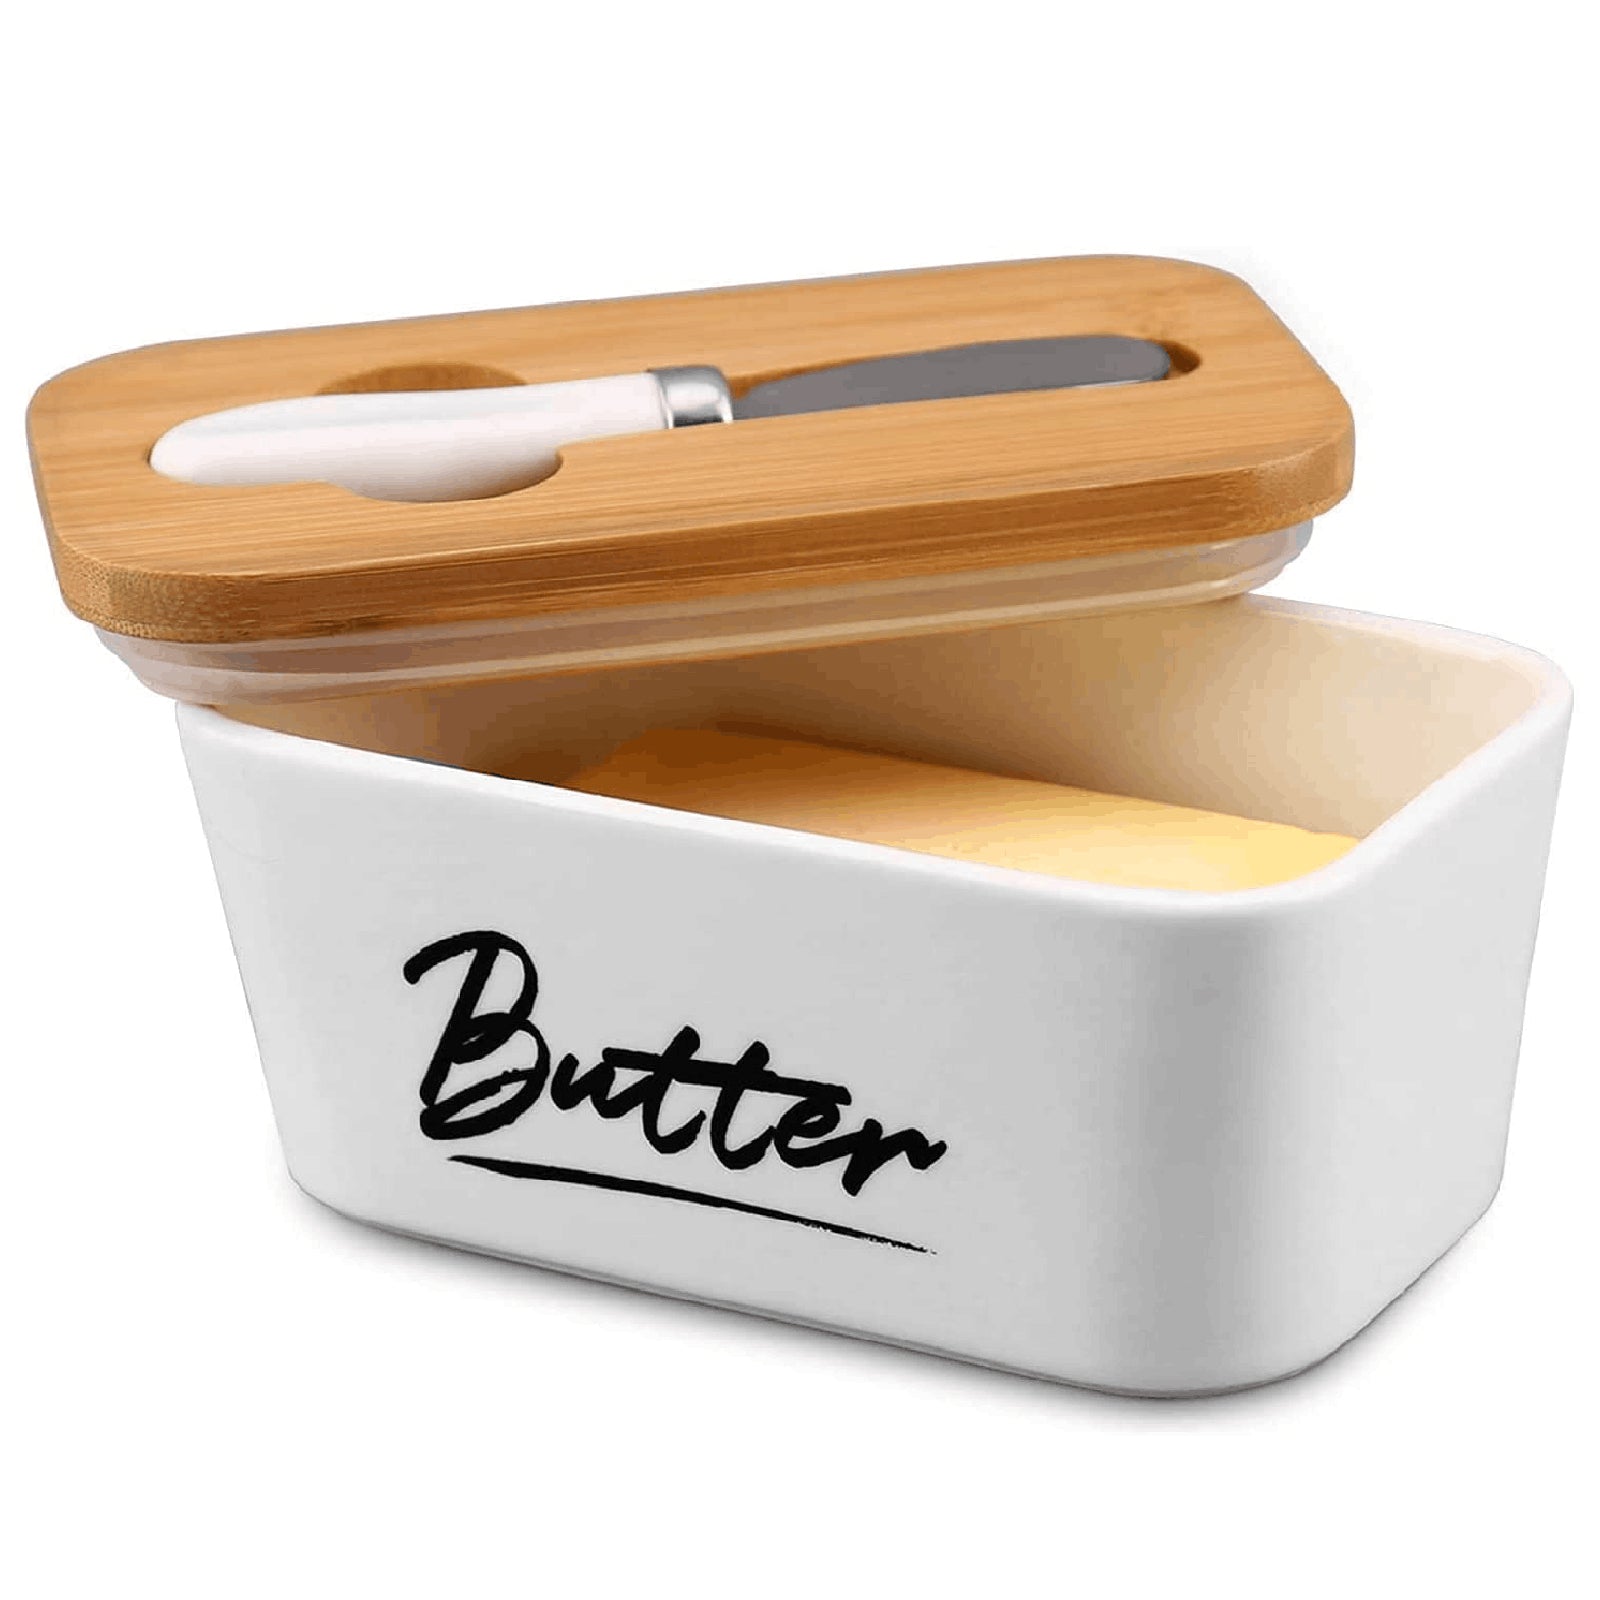 Large Butter Dish with Lid for Countertop Porcelain Butter